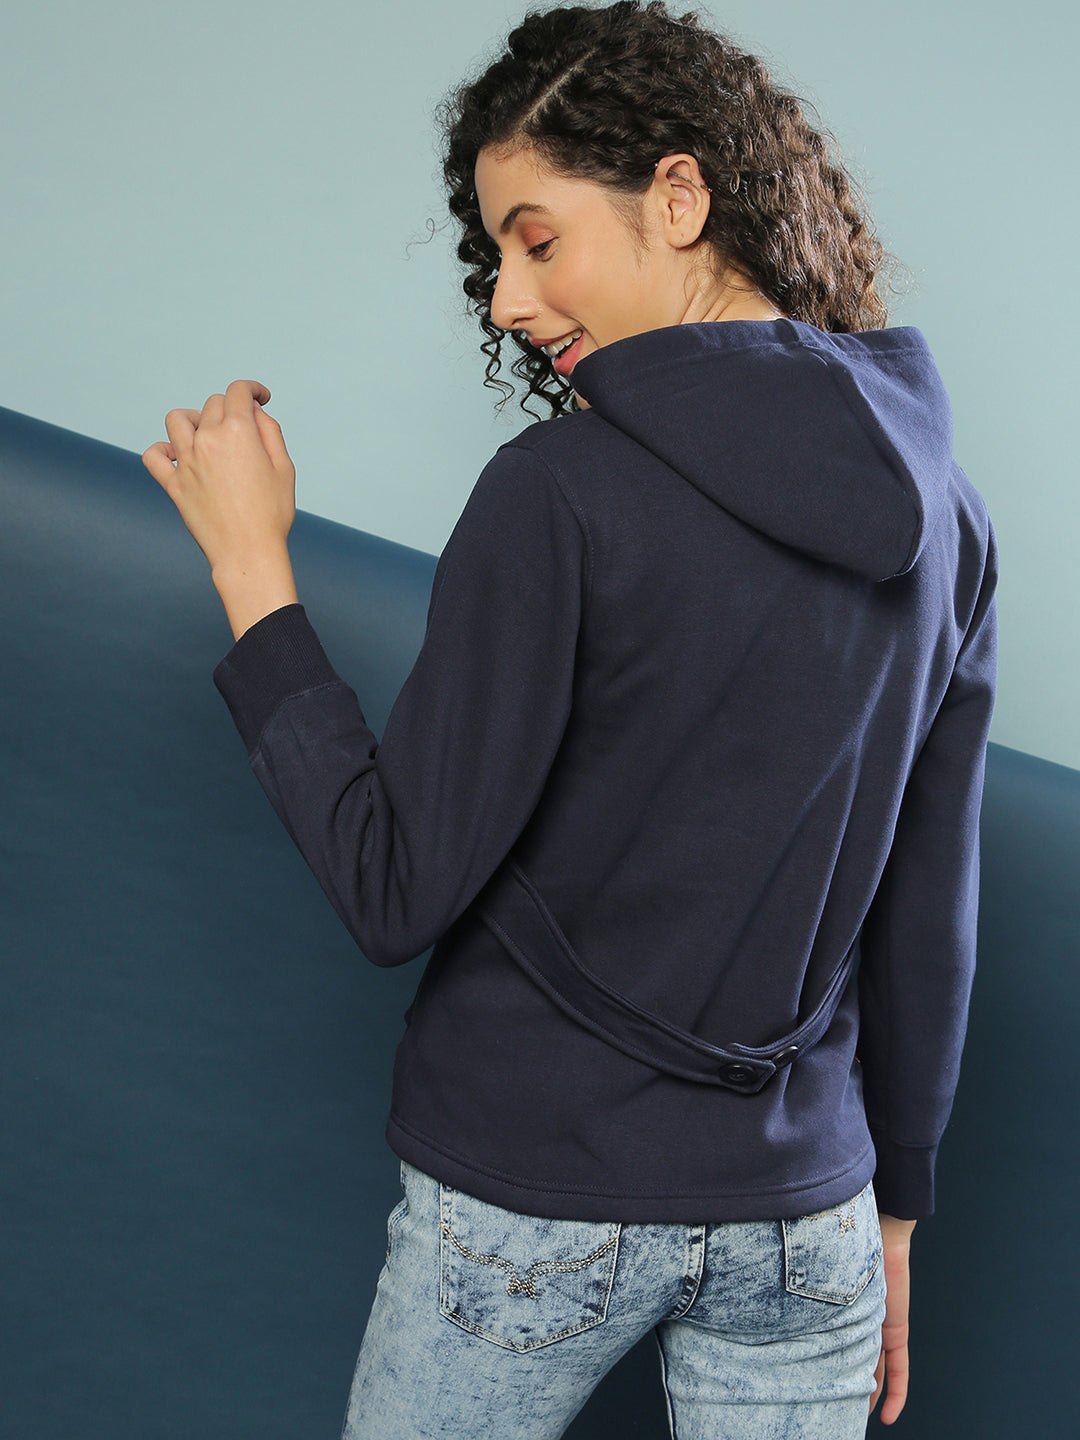 Double-Breasted Jacket With Angled Open Pockets